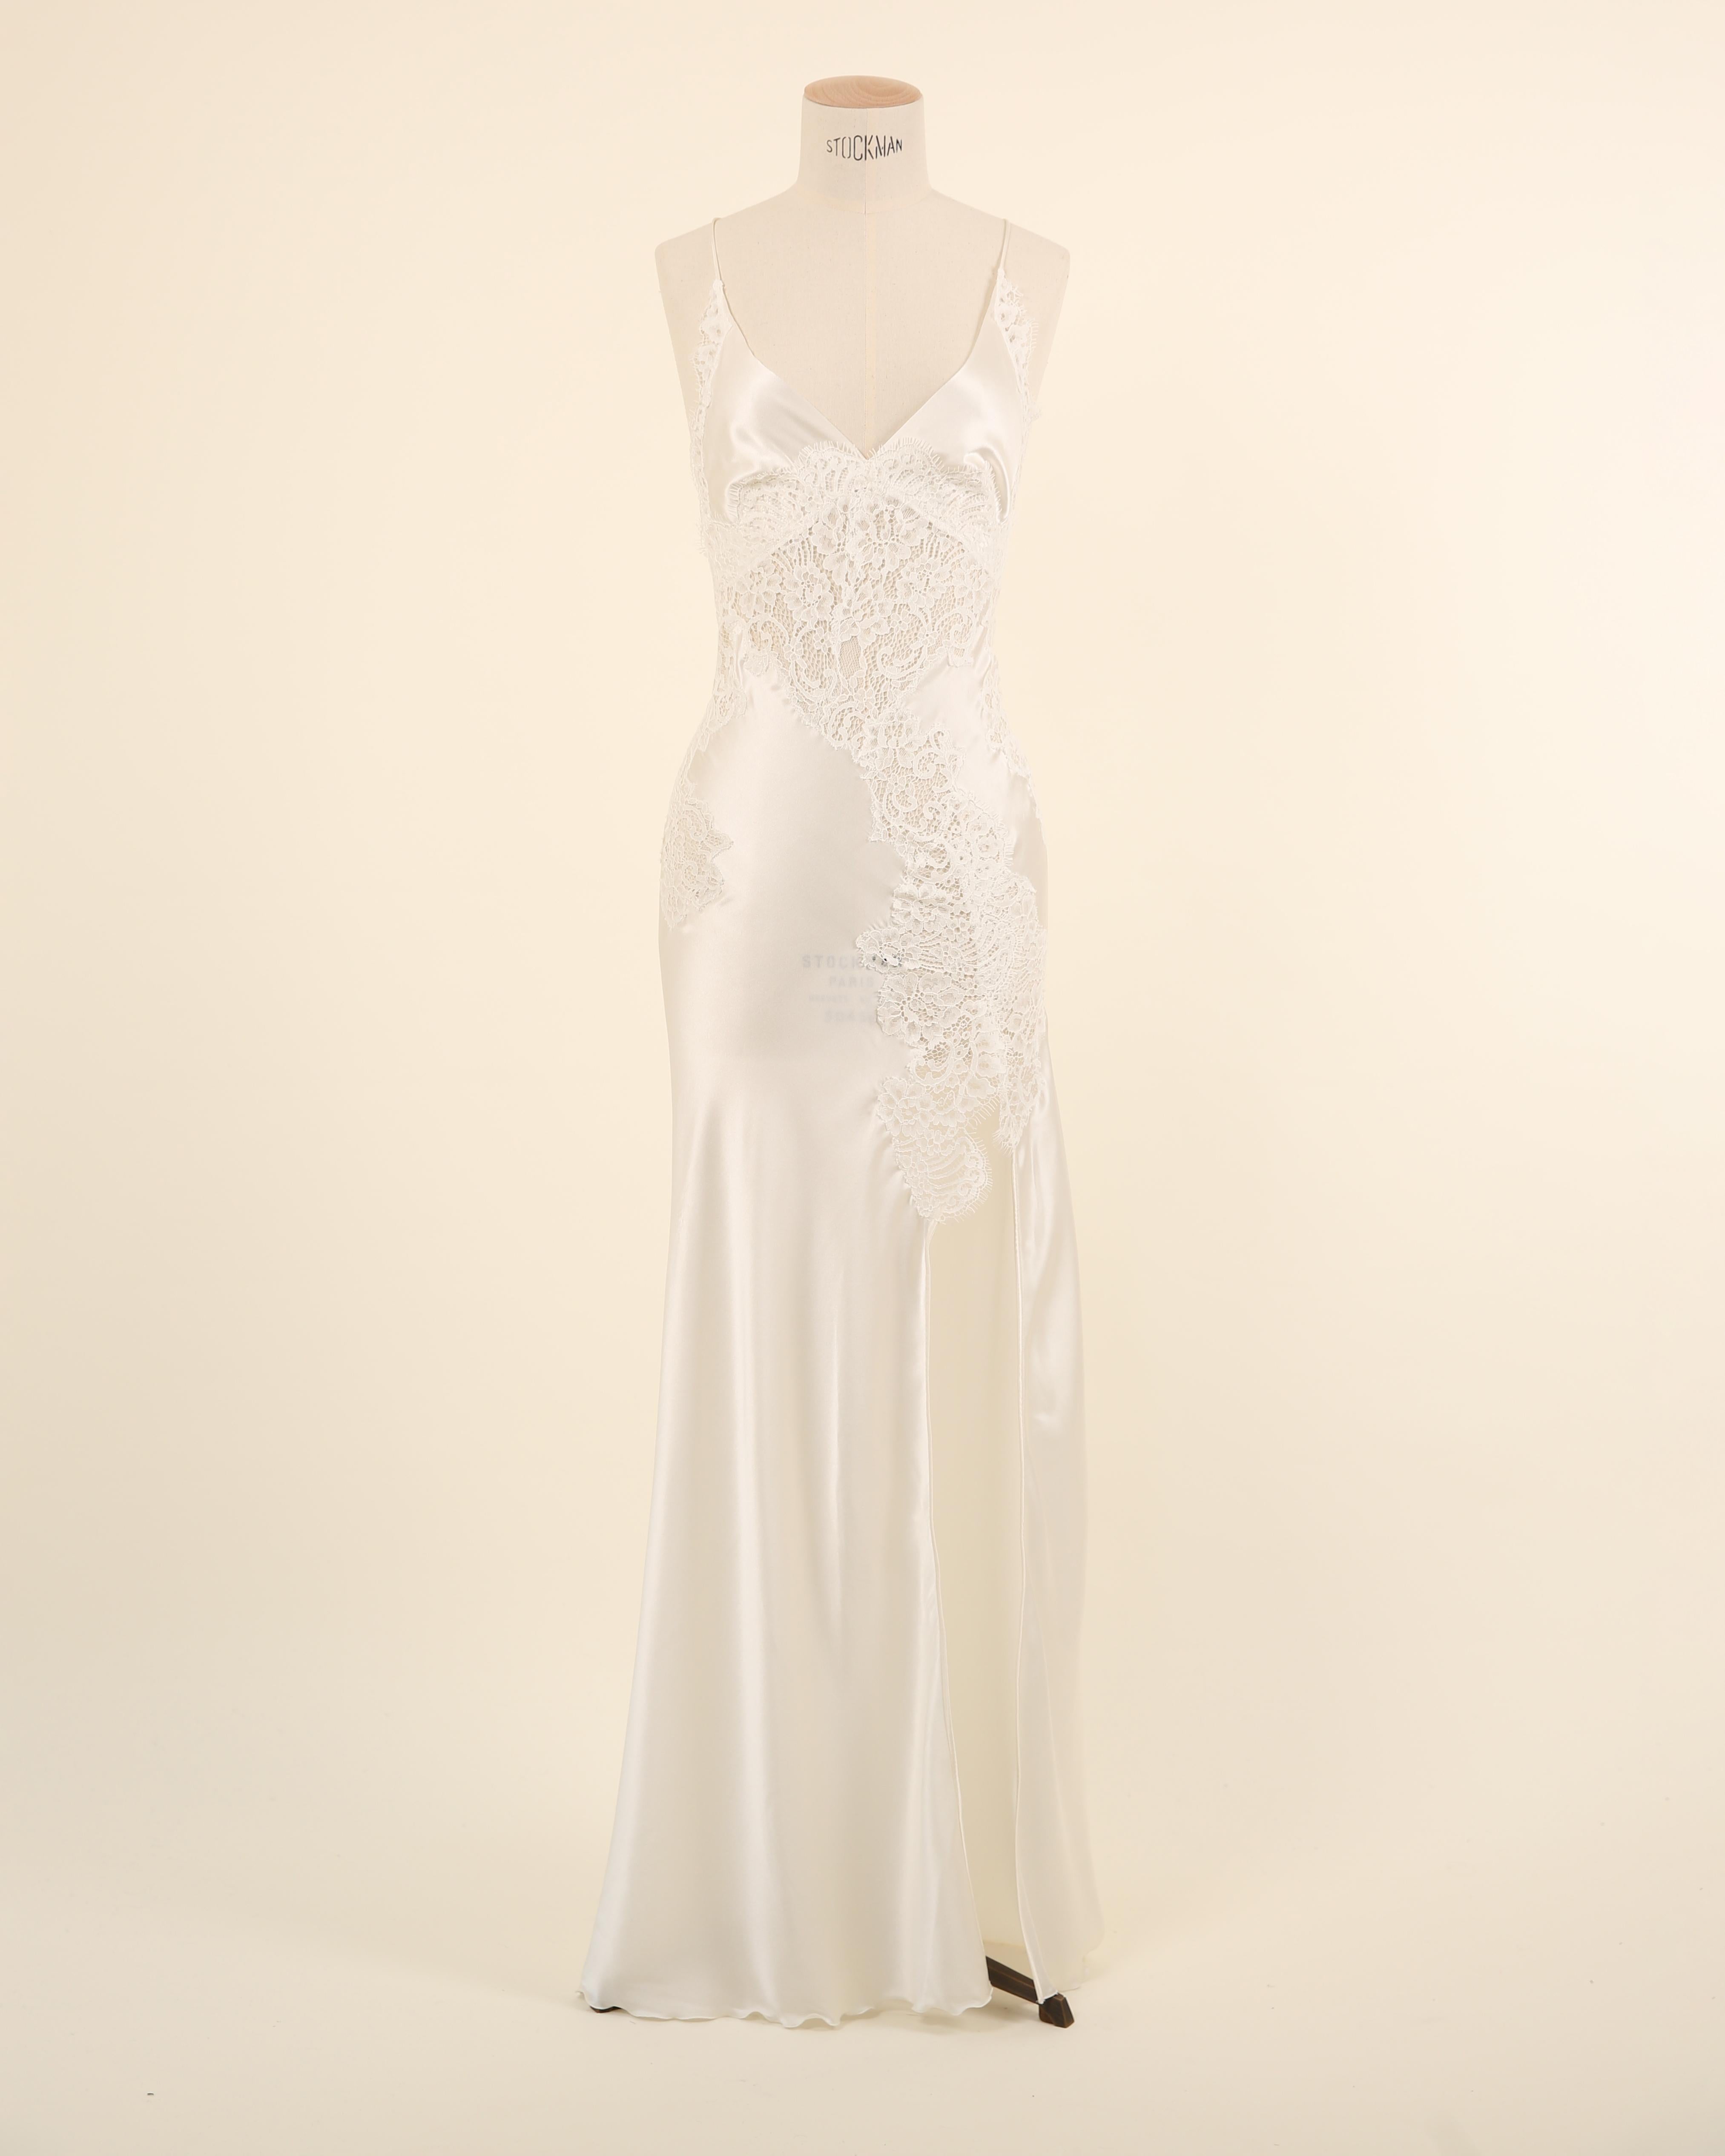 LOVE LALI VINTAGE

Ermanno Scervino Lingerie silk and lace night gown
I would say the gown is ivory, but it is very nearly white. It would make a beautiful night gown for a bride getting ready for her wedding
Silk with lace inserts
Low neckline and